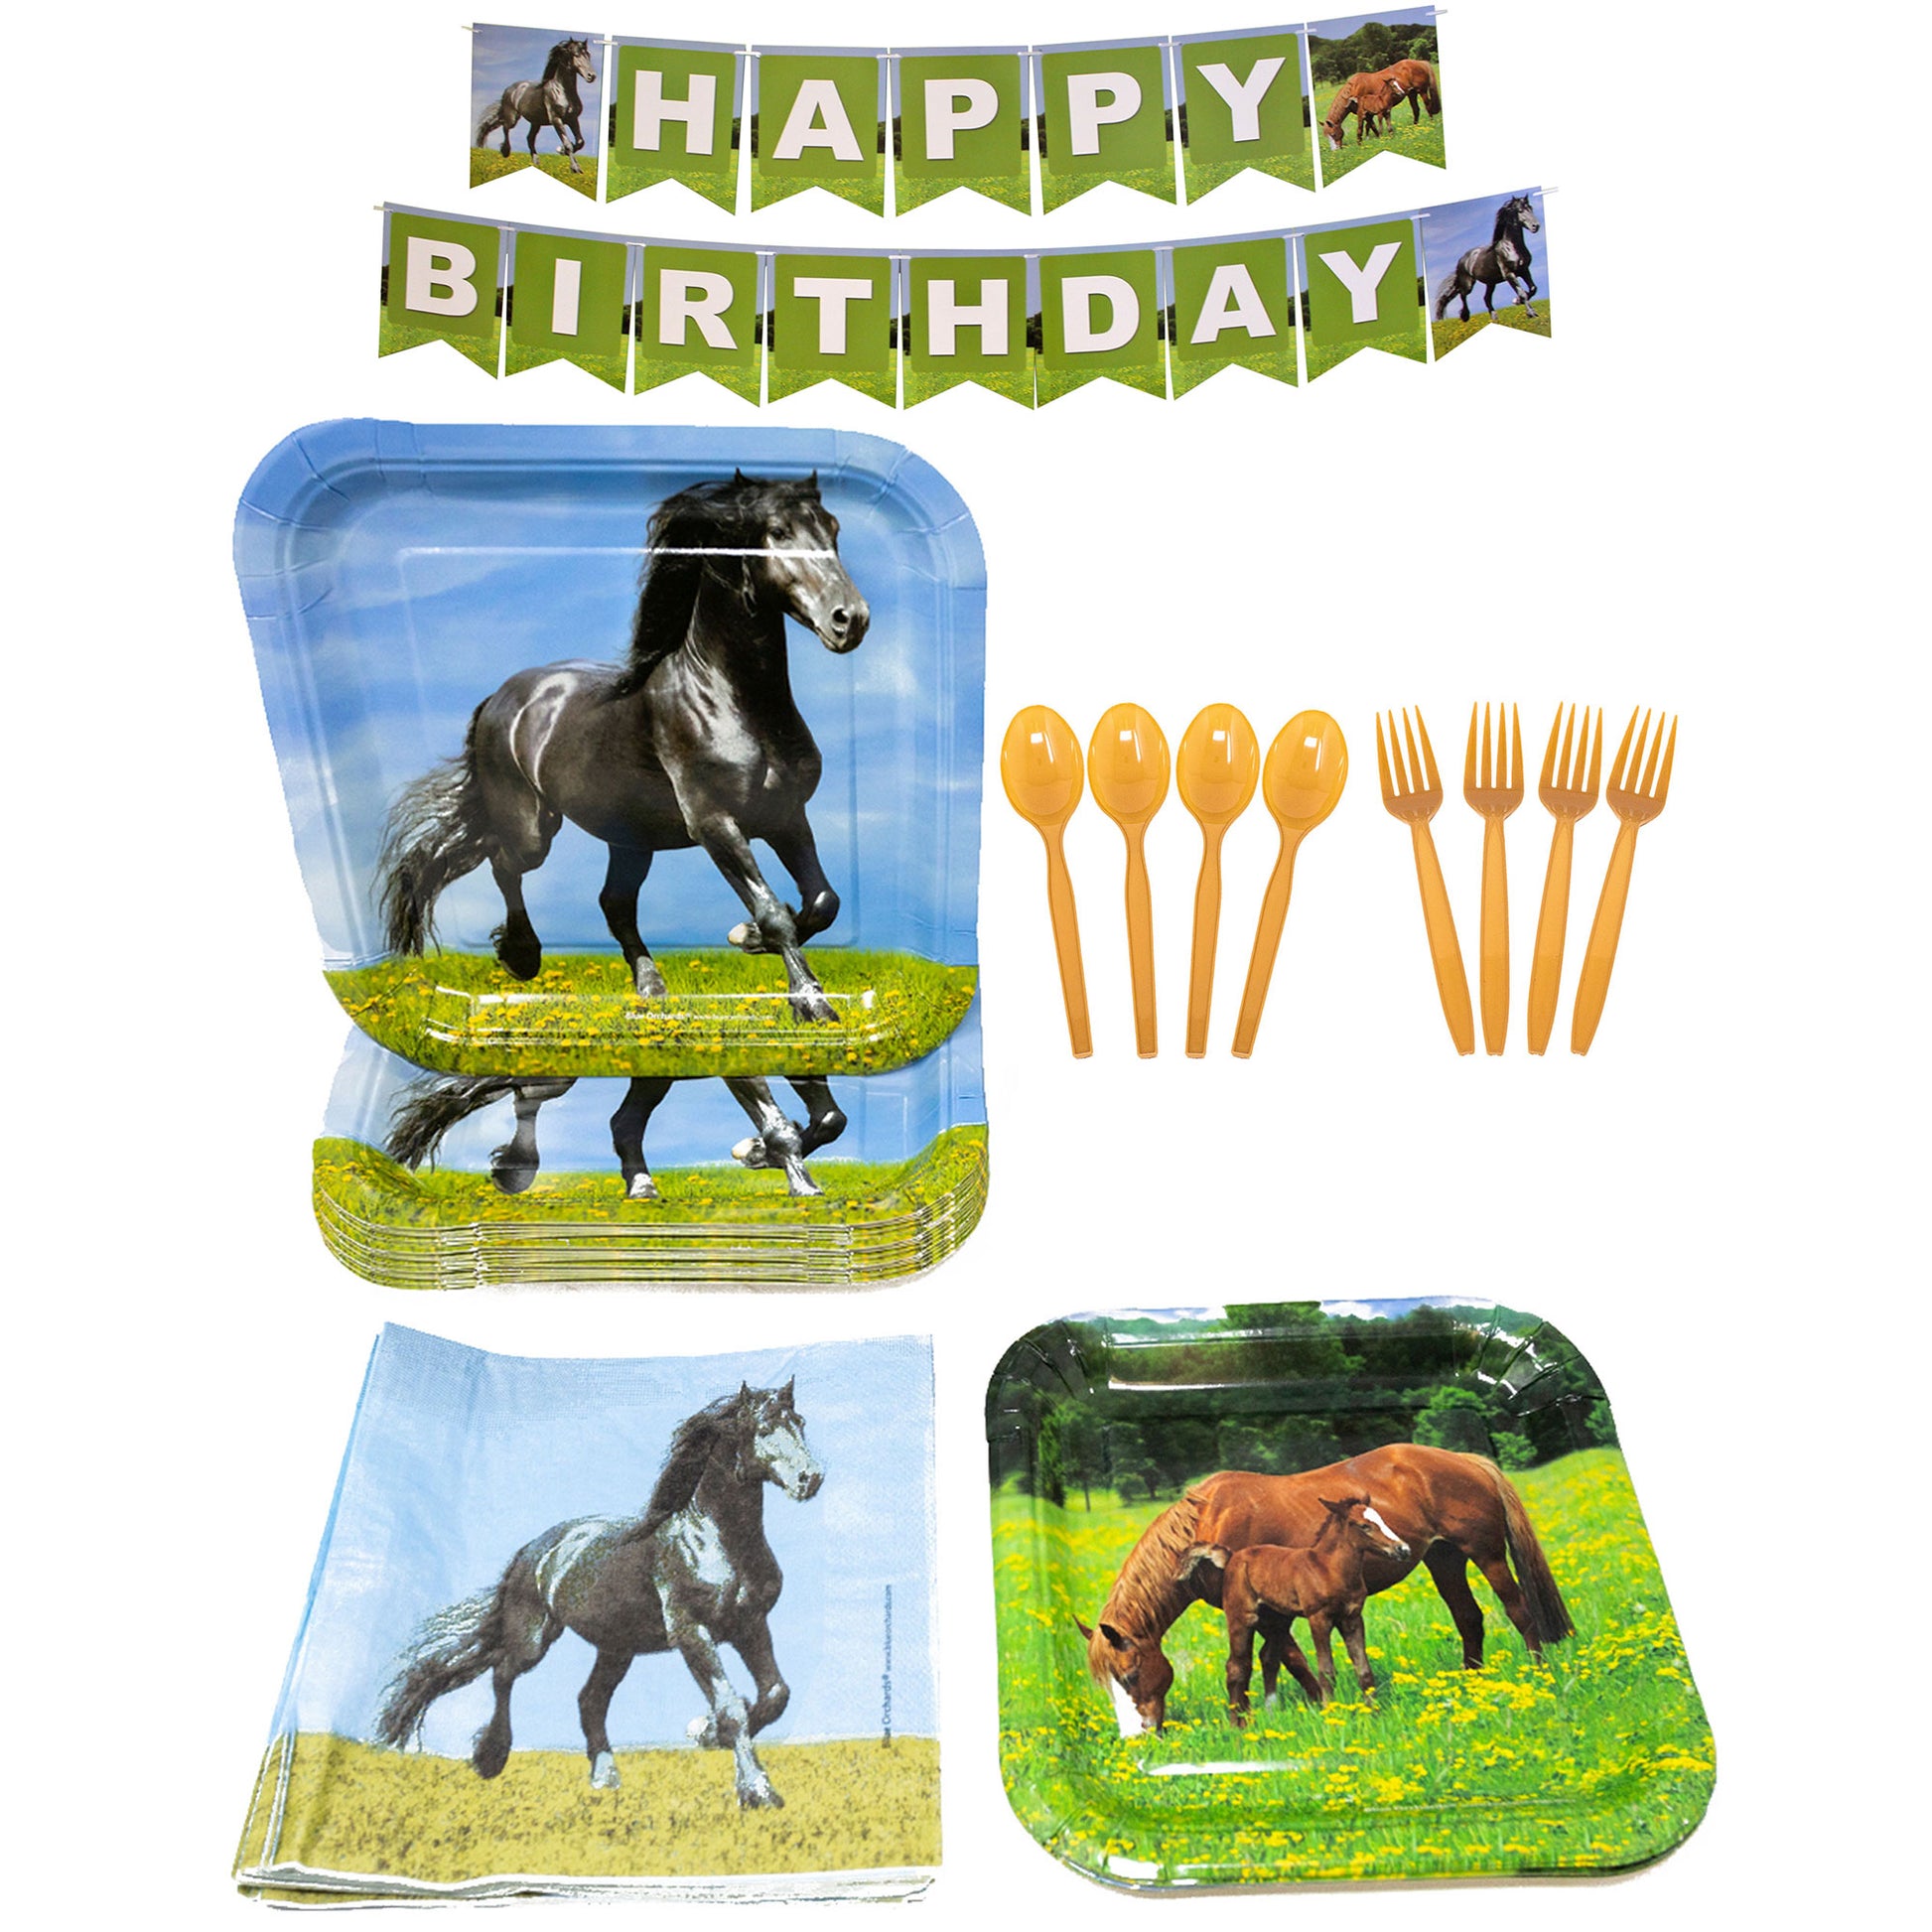 Image of the Horse Party Pack, which includes 16 9-inch paper dinner plates, 16 7-inch paper dessert plates, 20 paper lunch napkins, 1 happy birthday banner, plastic forks, and plastic spoons. This party pack features a fun horse theme, perfect for any equestrian lover's birthday or celebration. The plates and napkins feature a vibrant and colorful horse design, while the included plastic forks and spoons make for easy and convenient cleanup.